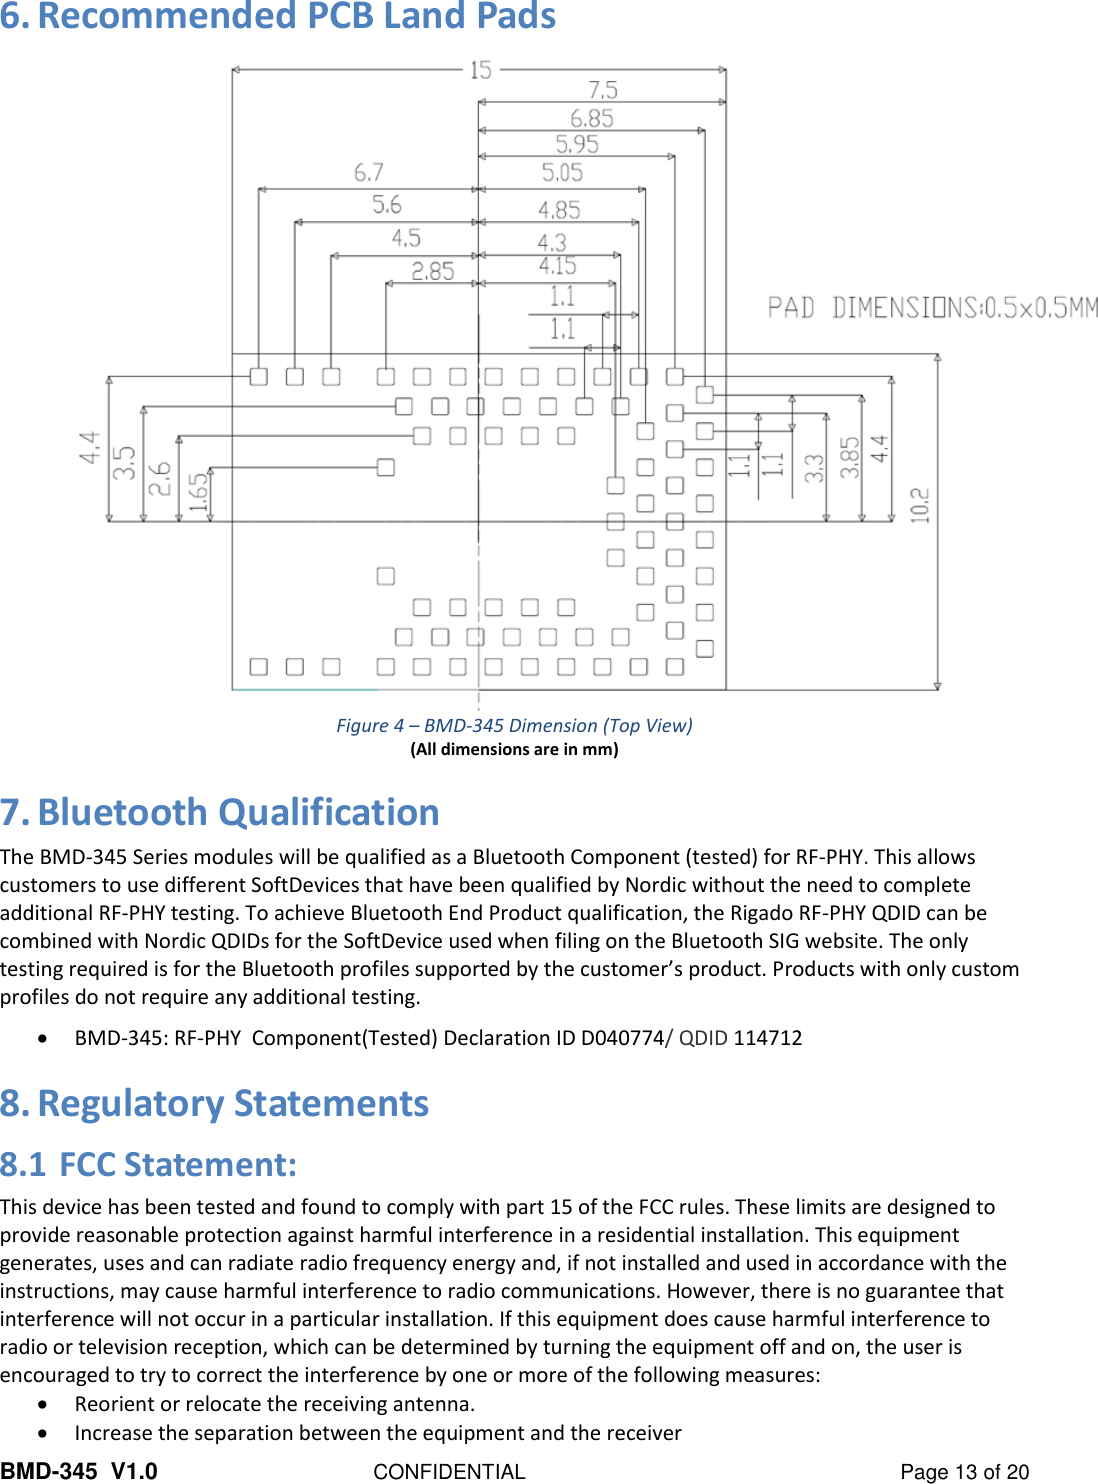 BMD-345  V1.0  CONFIDENTIAL  Page 13 of 20 6. Recommended PCB Land Pads  Figure 4 – BMD-345 Dimension (Top View) (All dimensions are in mm) 7. Bluetooth Qualification The BMD-345 Series modules will be qualified as a Bluetooth Component (tested) for RF-PHY. This allows customers to use different SoftDevices that have been qualified by Nordic without the need to complete additional RF-PHY testing. To achieve Bluetooth End Product qualification, the Rigado RF-PHY QDID can be combined with Nordic QDIDs for the SoftDevice used when filing on the Bluetooth SIG website. The only testing required is for the Bluetooth profiles supported by the customer’s product. Products with only custom profiles do not require any additional testing. • BMD-345: RF-PHY  Component(Tested) Declaration ID D040774/ QDID 114712 8. Regulatory Statements 8.1 FCC Statement: This device has been tested and found to comply with part 15 of the FCC rules. These limits are designed to provide reasonable protection against harmful interference in a residential installation. This equipment generates, uses and can radiate radio frequency energy and, if not installed and used in accordance with the instructions, may cause harmful interference to radio communications. However, there is no guarantee that interference will not occur in a particular installation. If this equipment does cause harmful interference to radio or television reception, which can be determined by turning the equipment off and on, the user is encouraged to try to correct the interference by one or more of the following measures: • Reorient or relocate the receiving antenna. • Increase the separation between the equipment and the receiver 